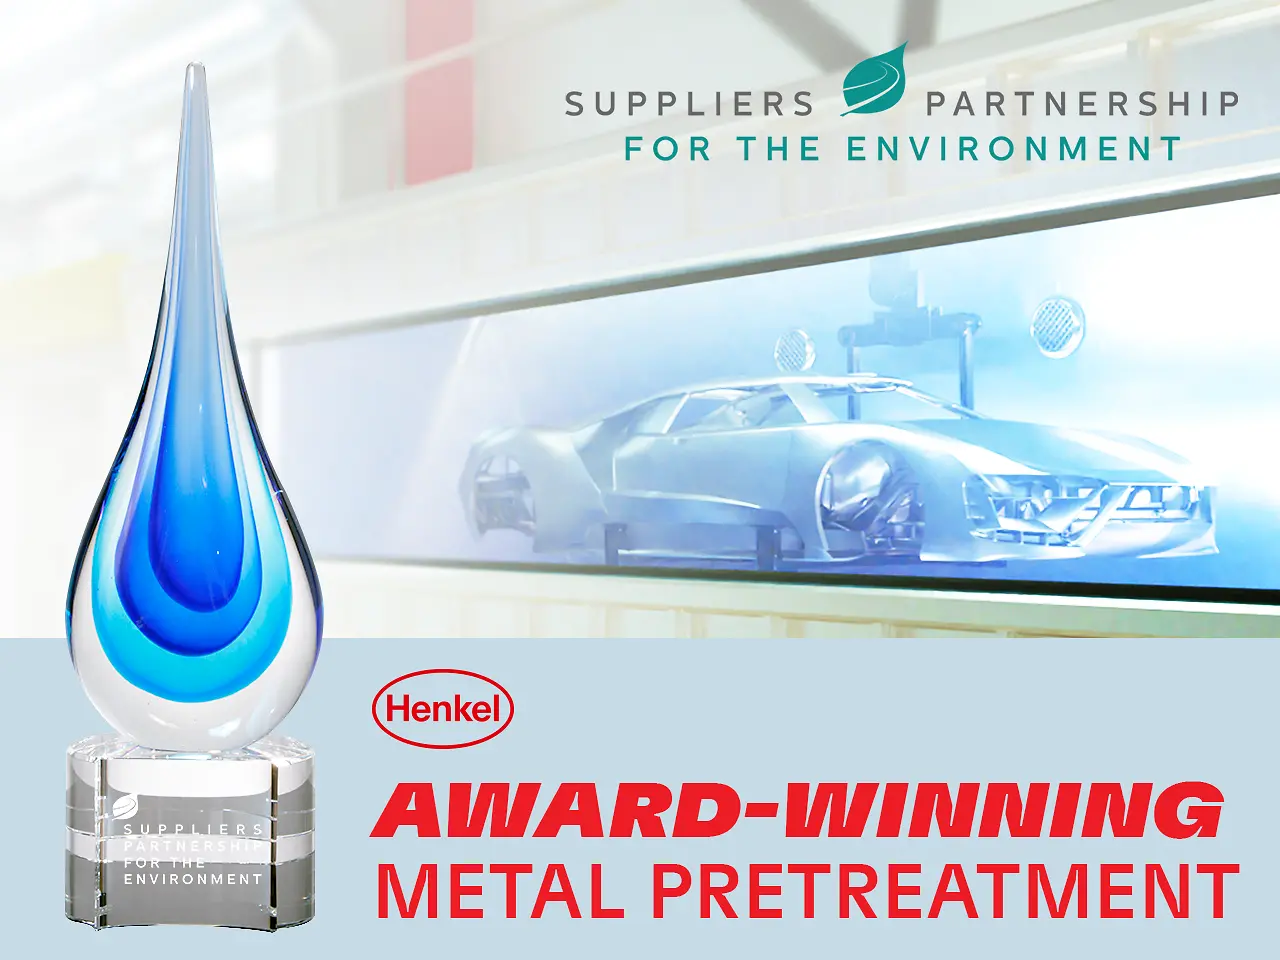 
Henkel was recognized with a Suppliers Partnership Award for sustainability contributions
in automotive pretreatment.